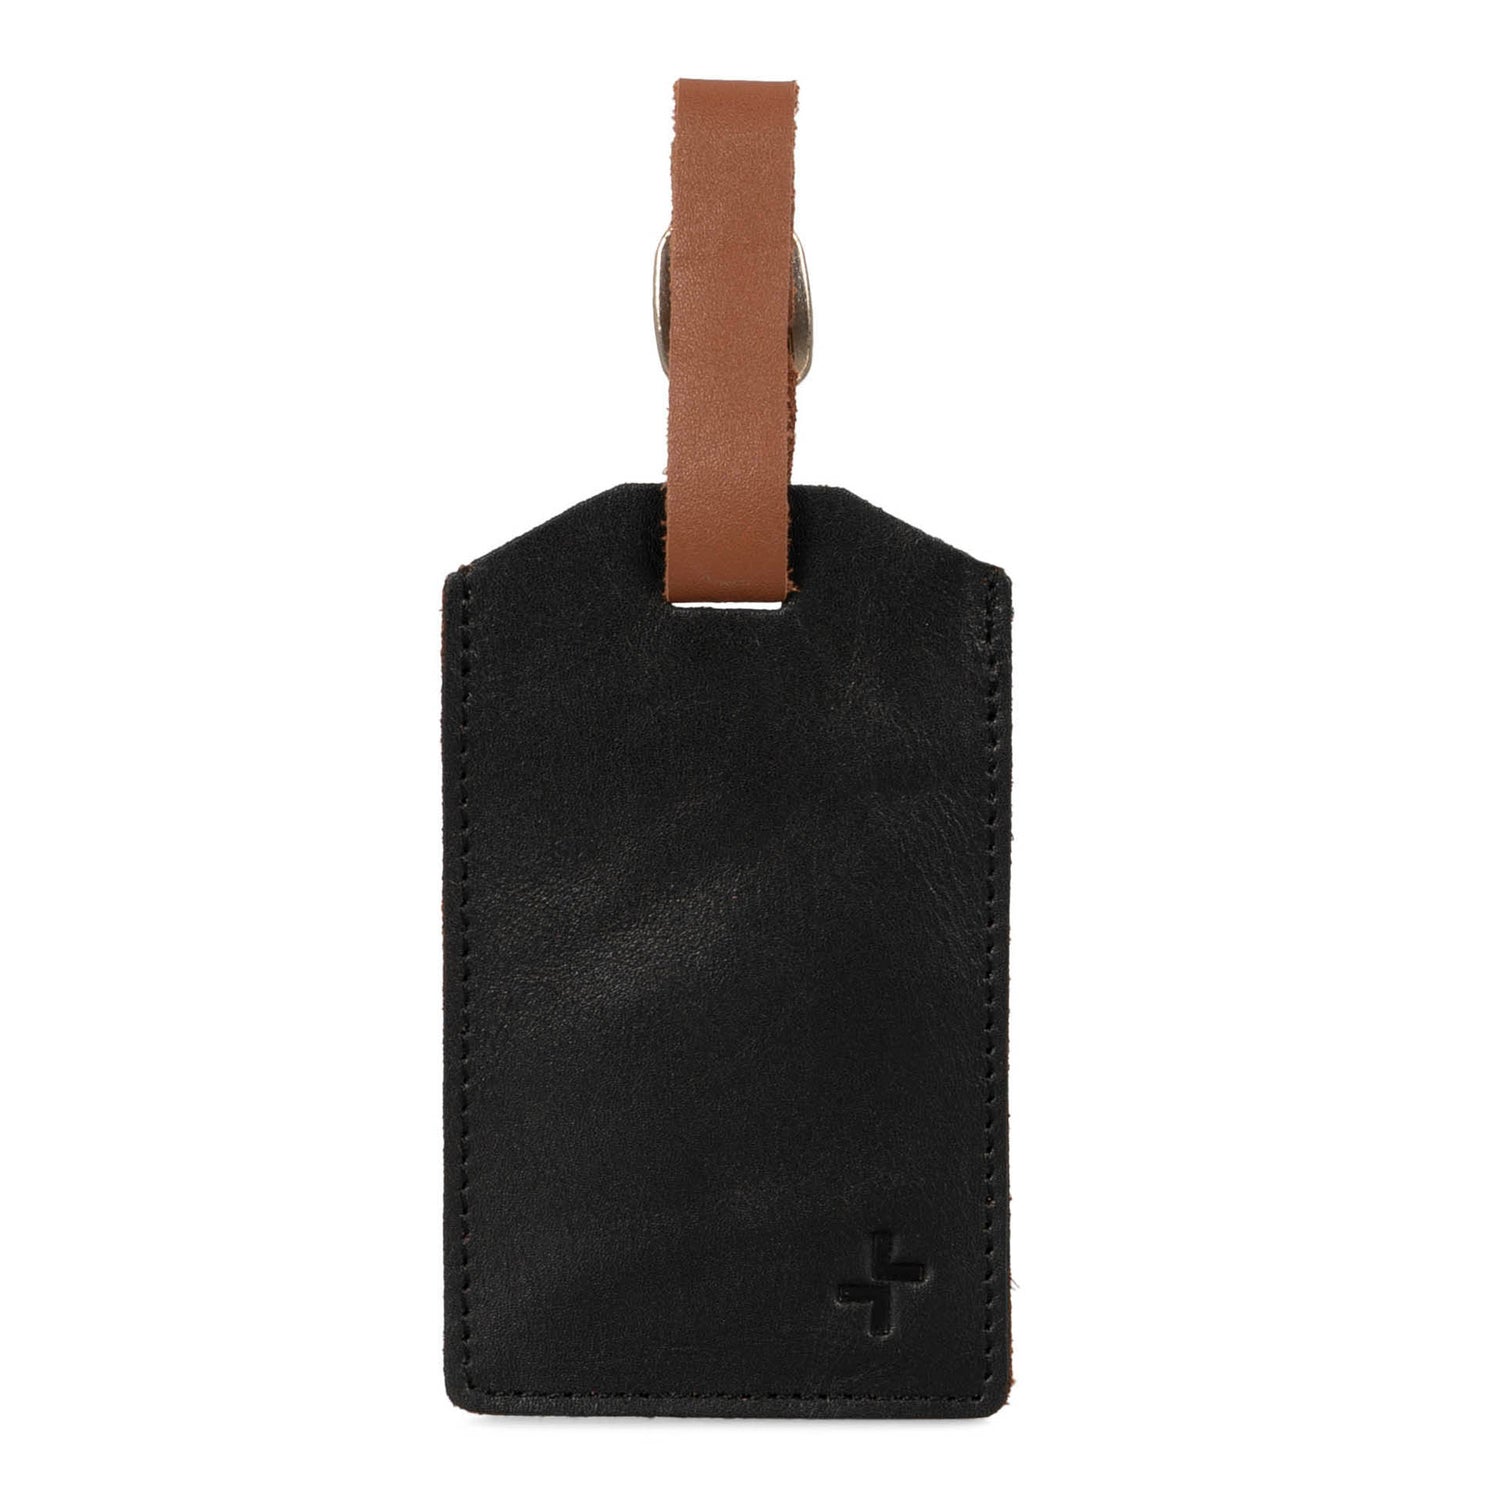 Front side of a black leather luggage tag designed by Tracker showing its supple texture and brown strap.